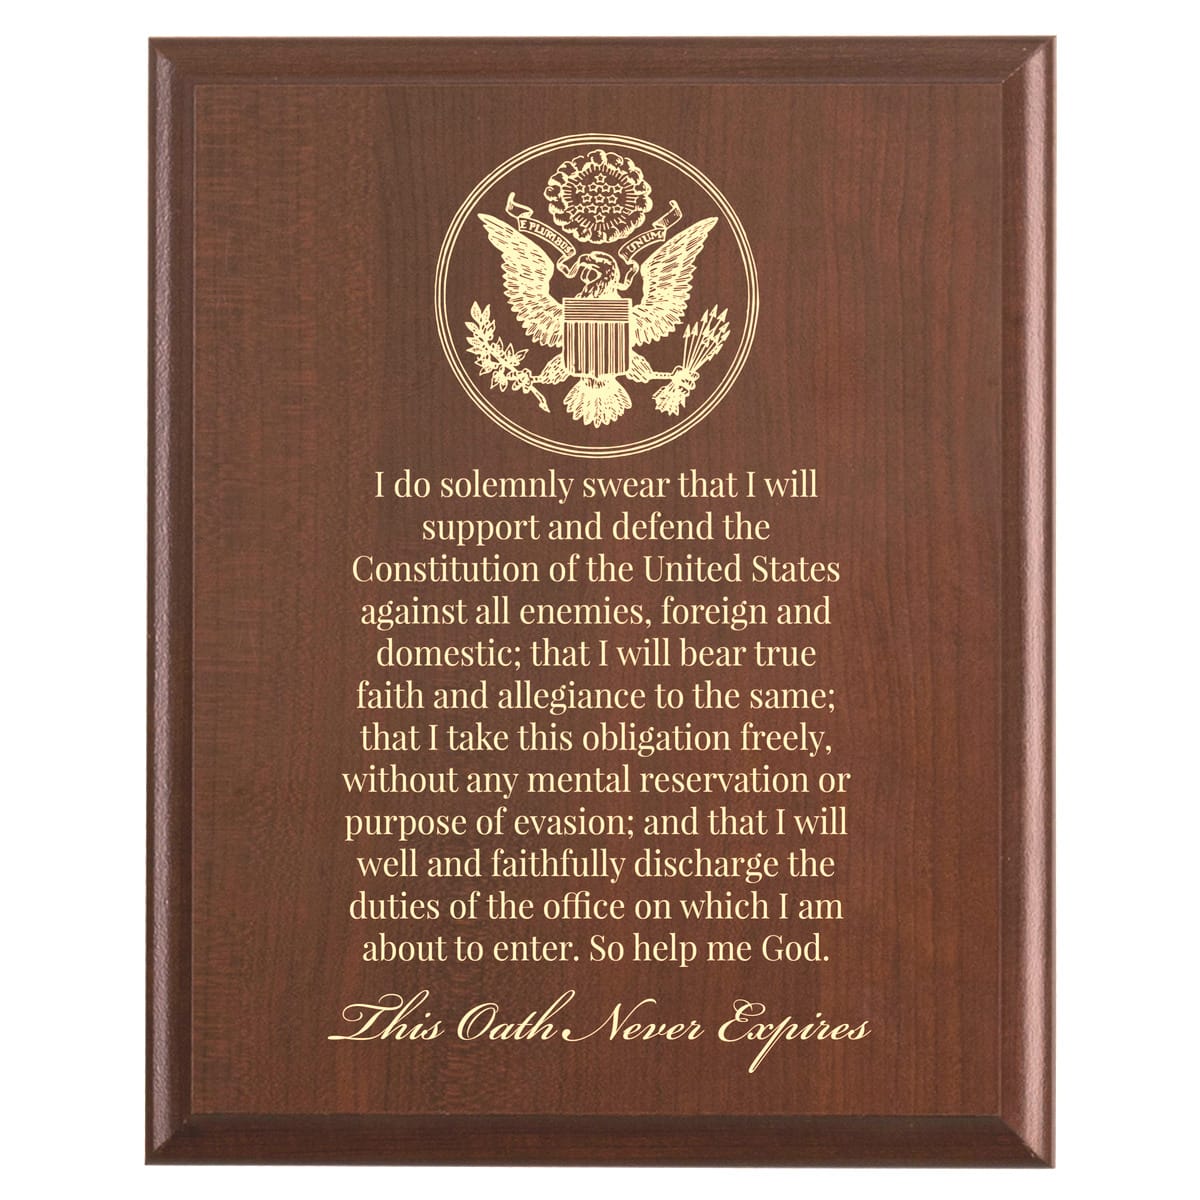 Plaque photo: Oath of Commissioned Officer Military Plaque design with free personalization. Wood style finish with customized text.